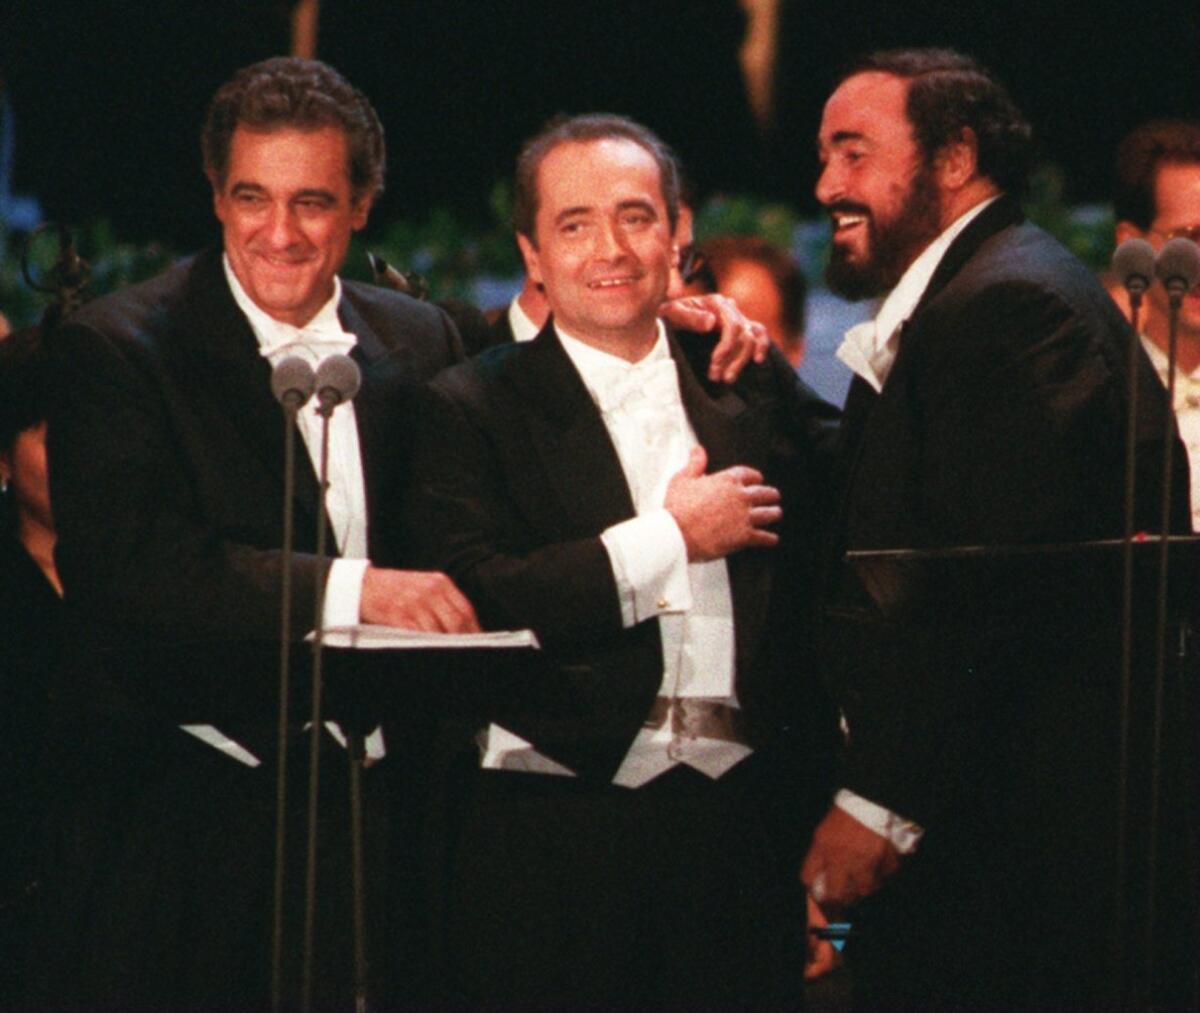 Plácido Domingo, from left, José Carreras and Luciano Pavarotti at Dodger Stadium in Los Angeles in 1994.